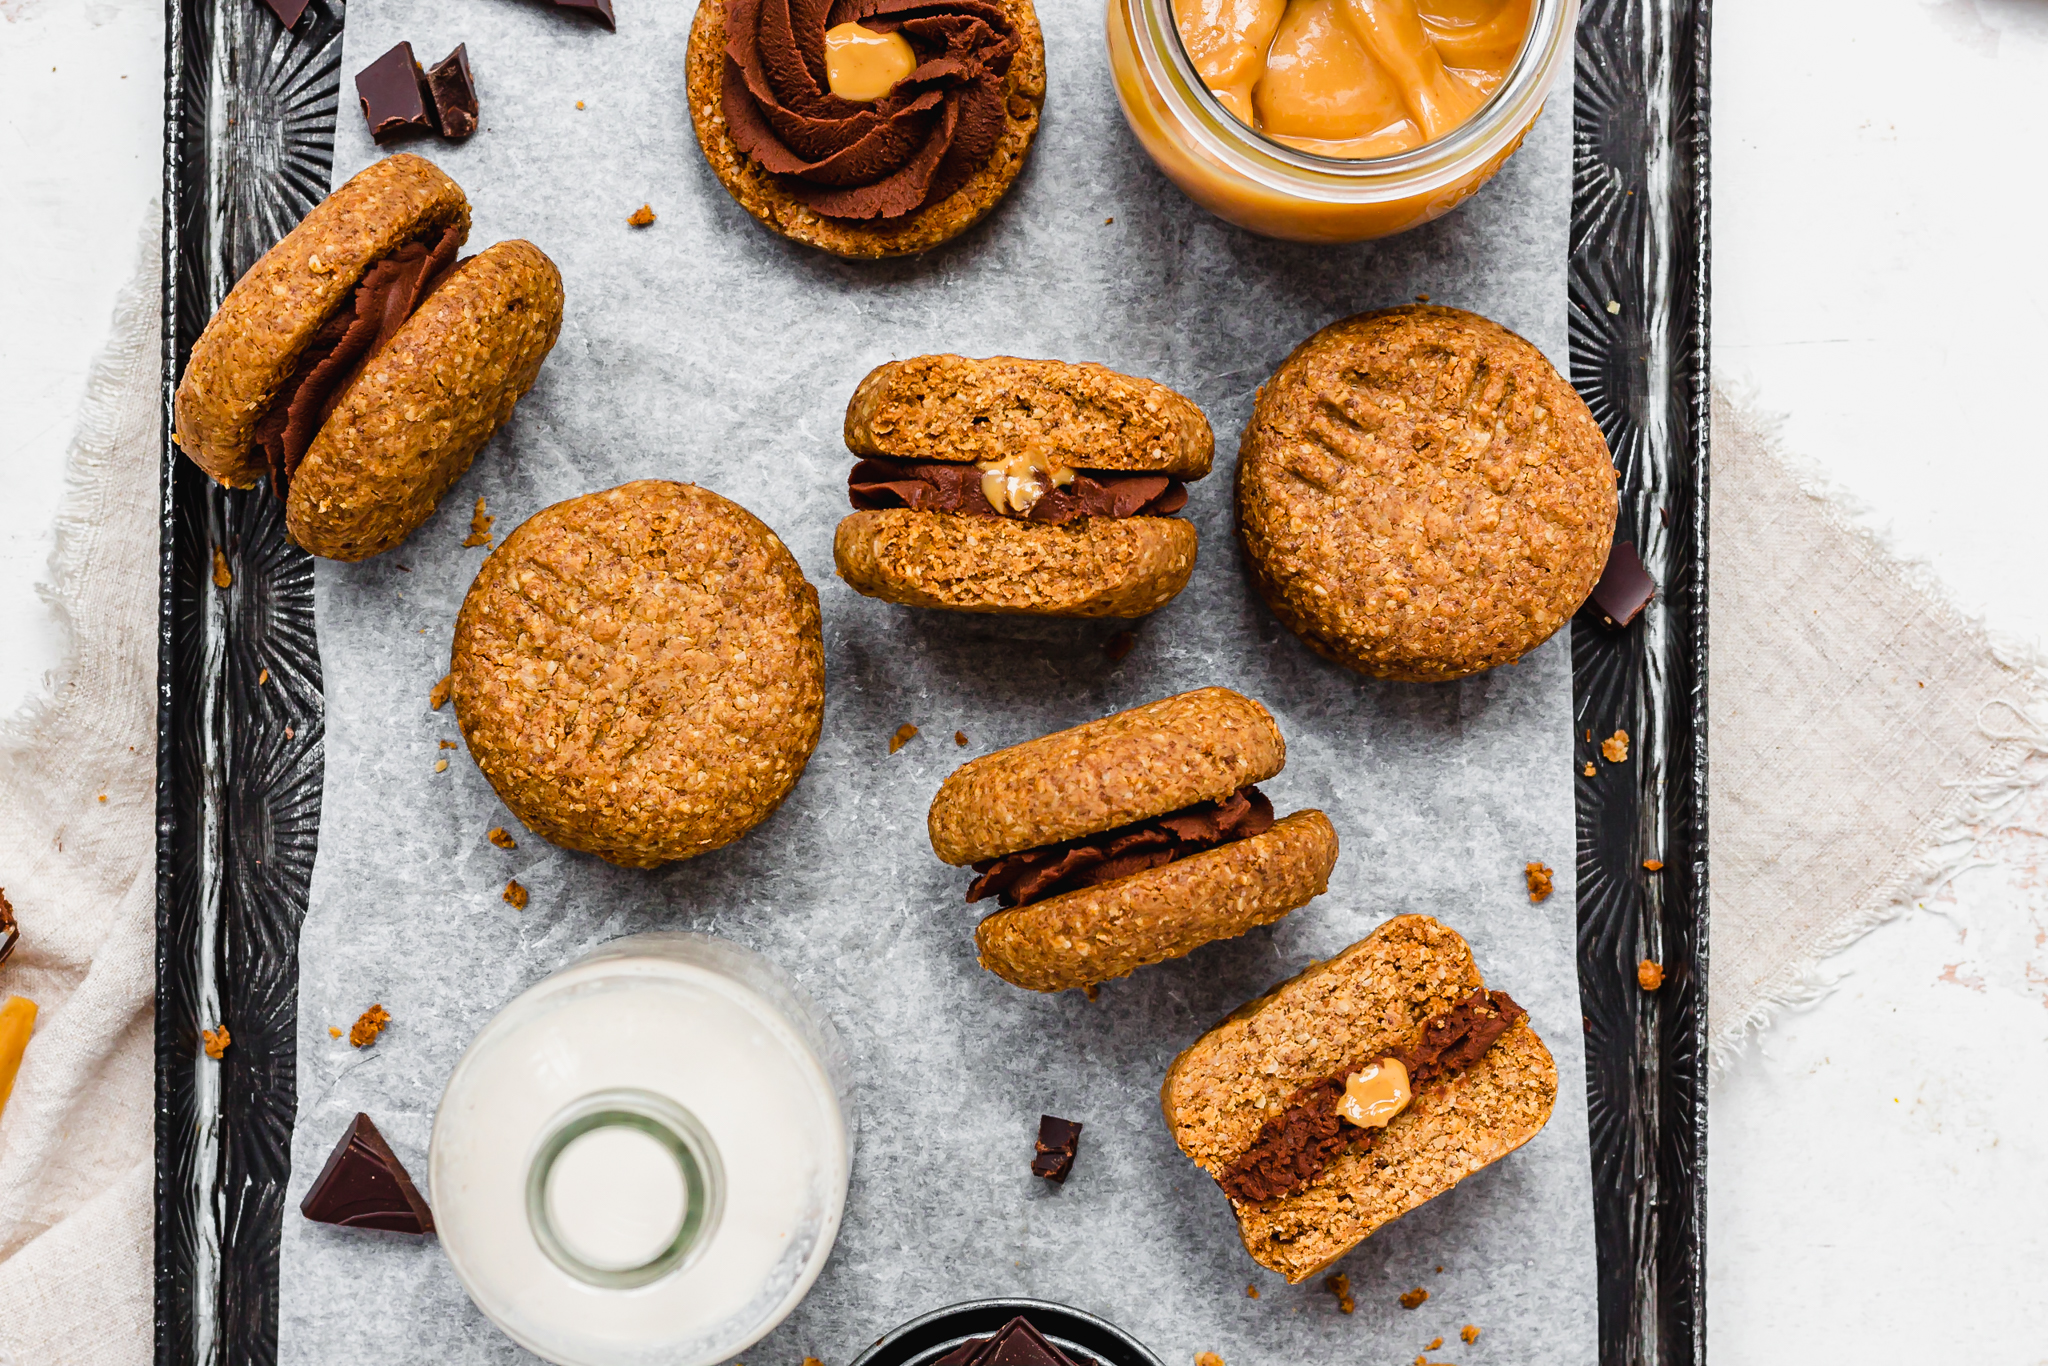 Landscape photo of Chocolate Filled Peanut Butter Cookie Sandwiches